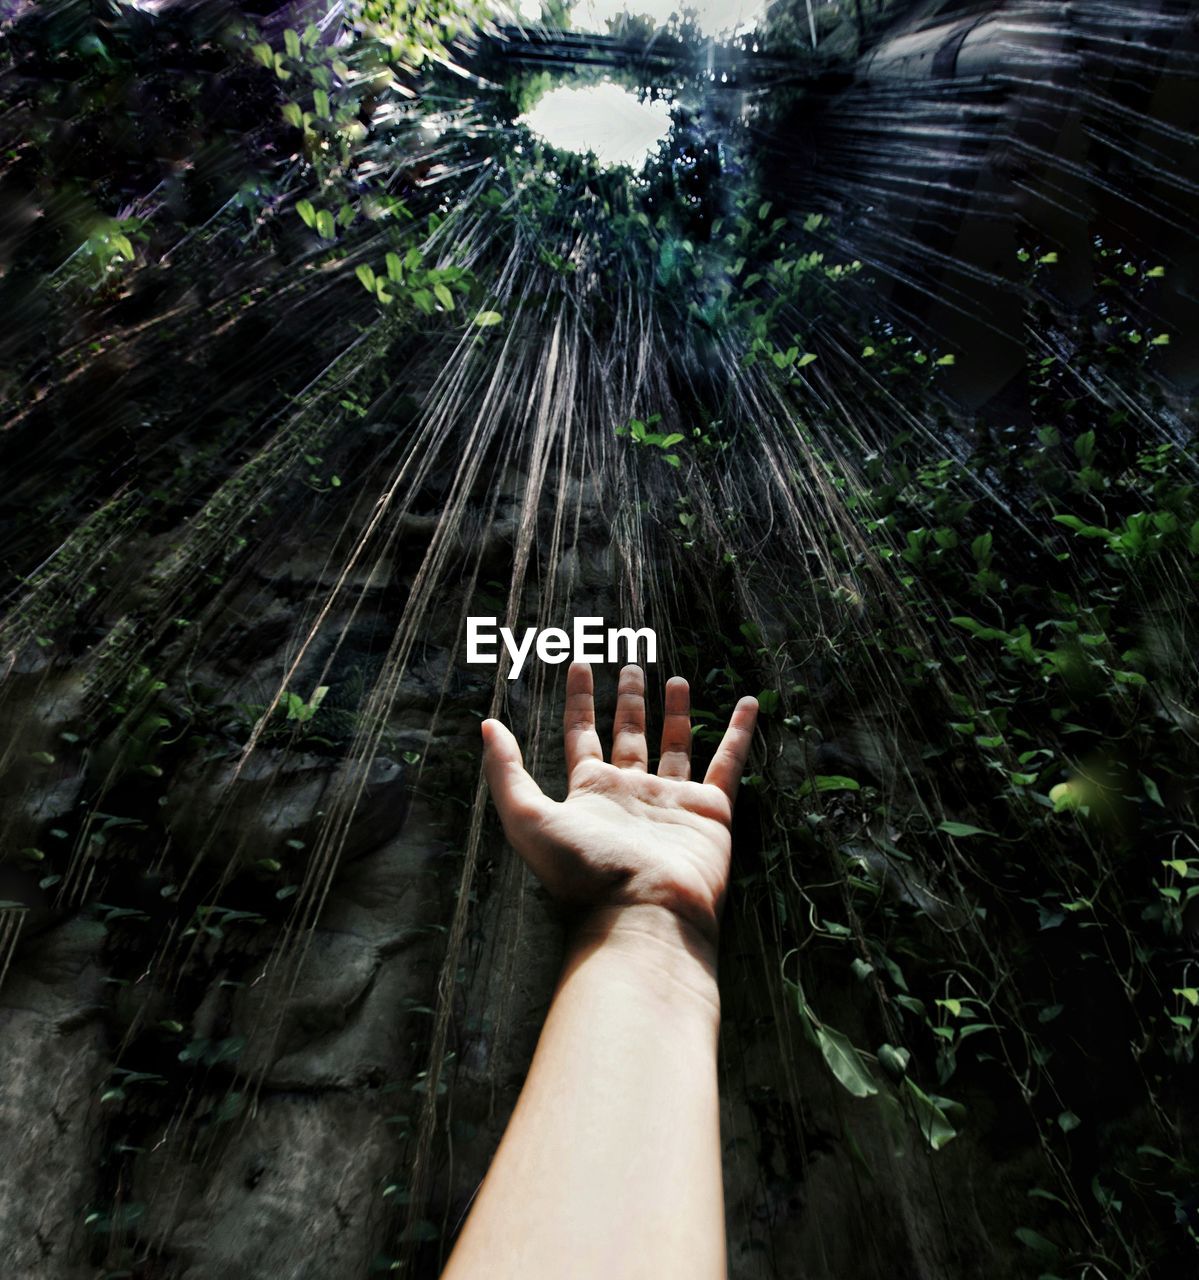 Cropped image of hand against branches hanging from rock formation